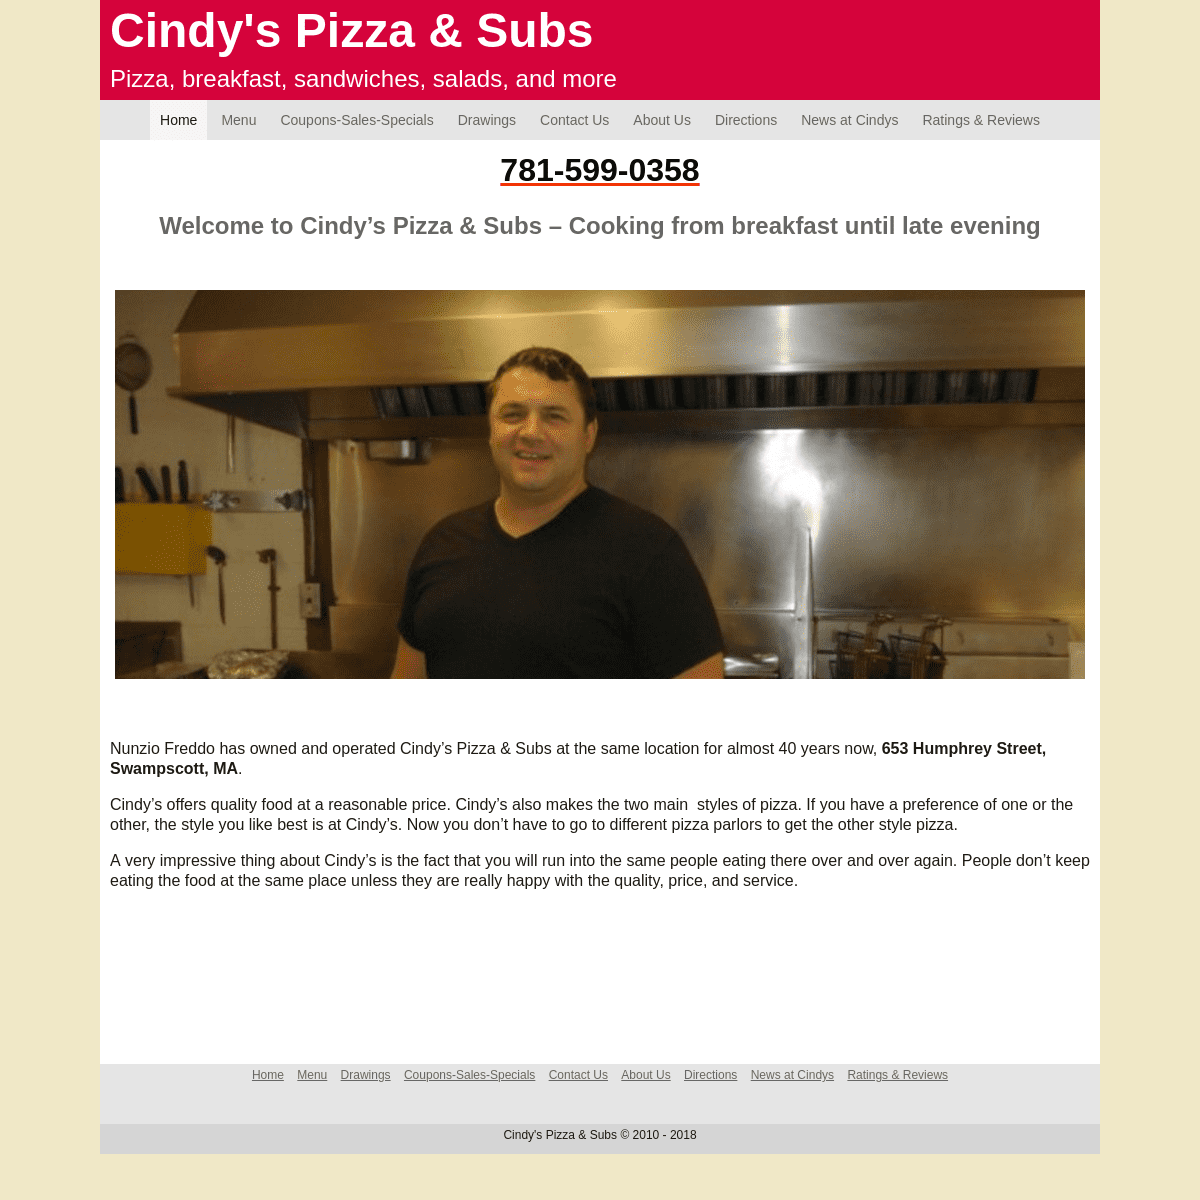 Cindy's Pizza & Subs | Pizza, breakfast, sandwiches, salads, and more